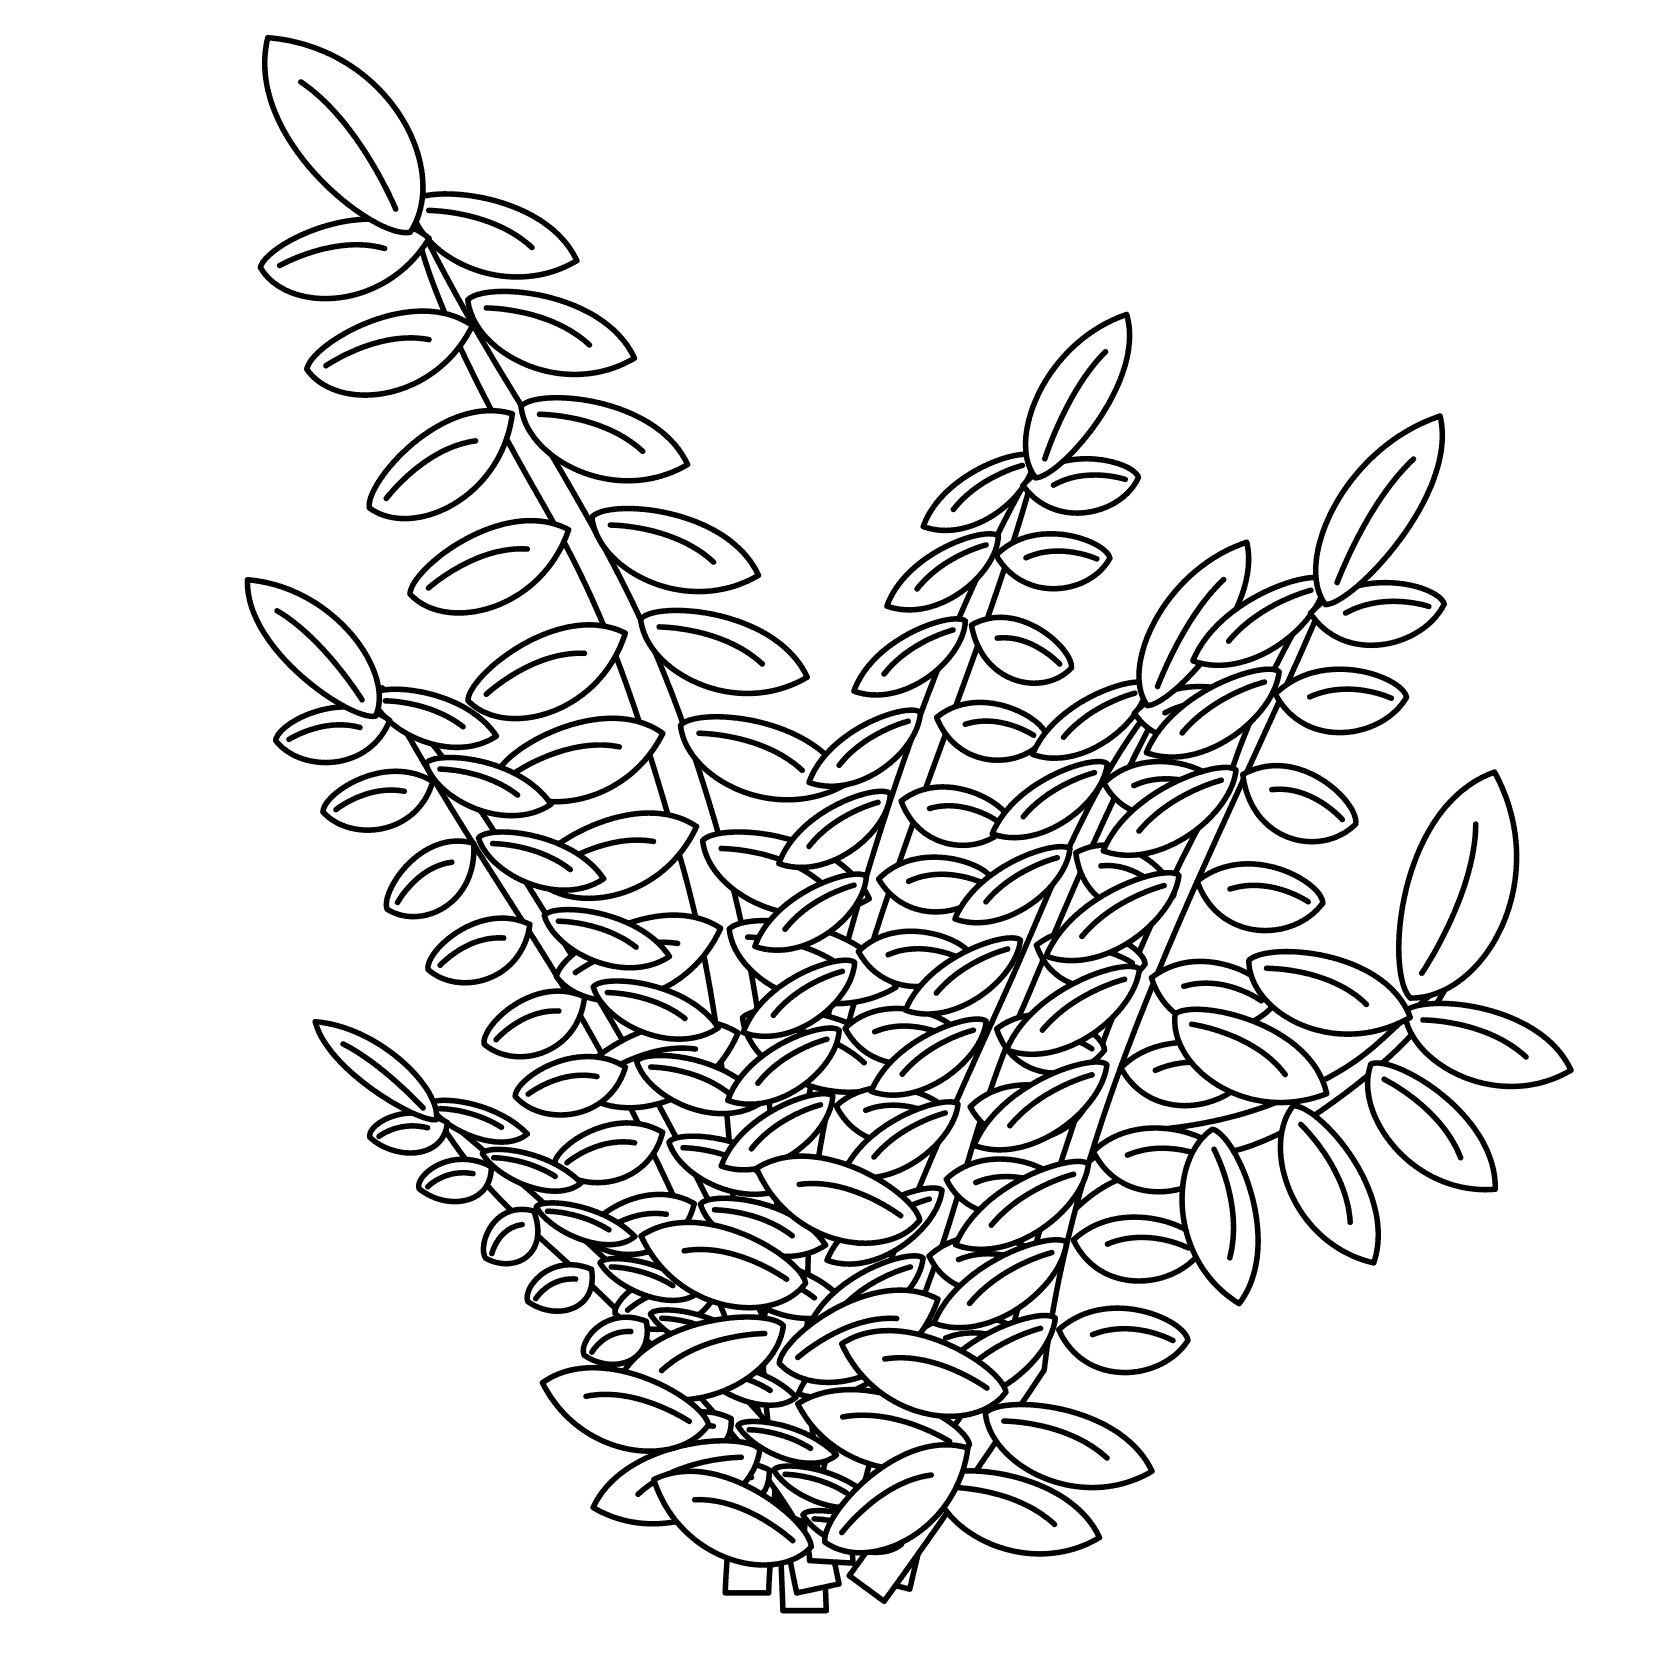 Coloring pages plants - free downloads